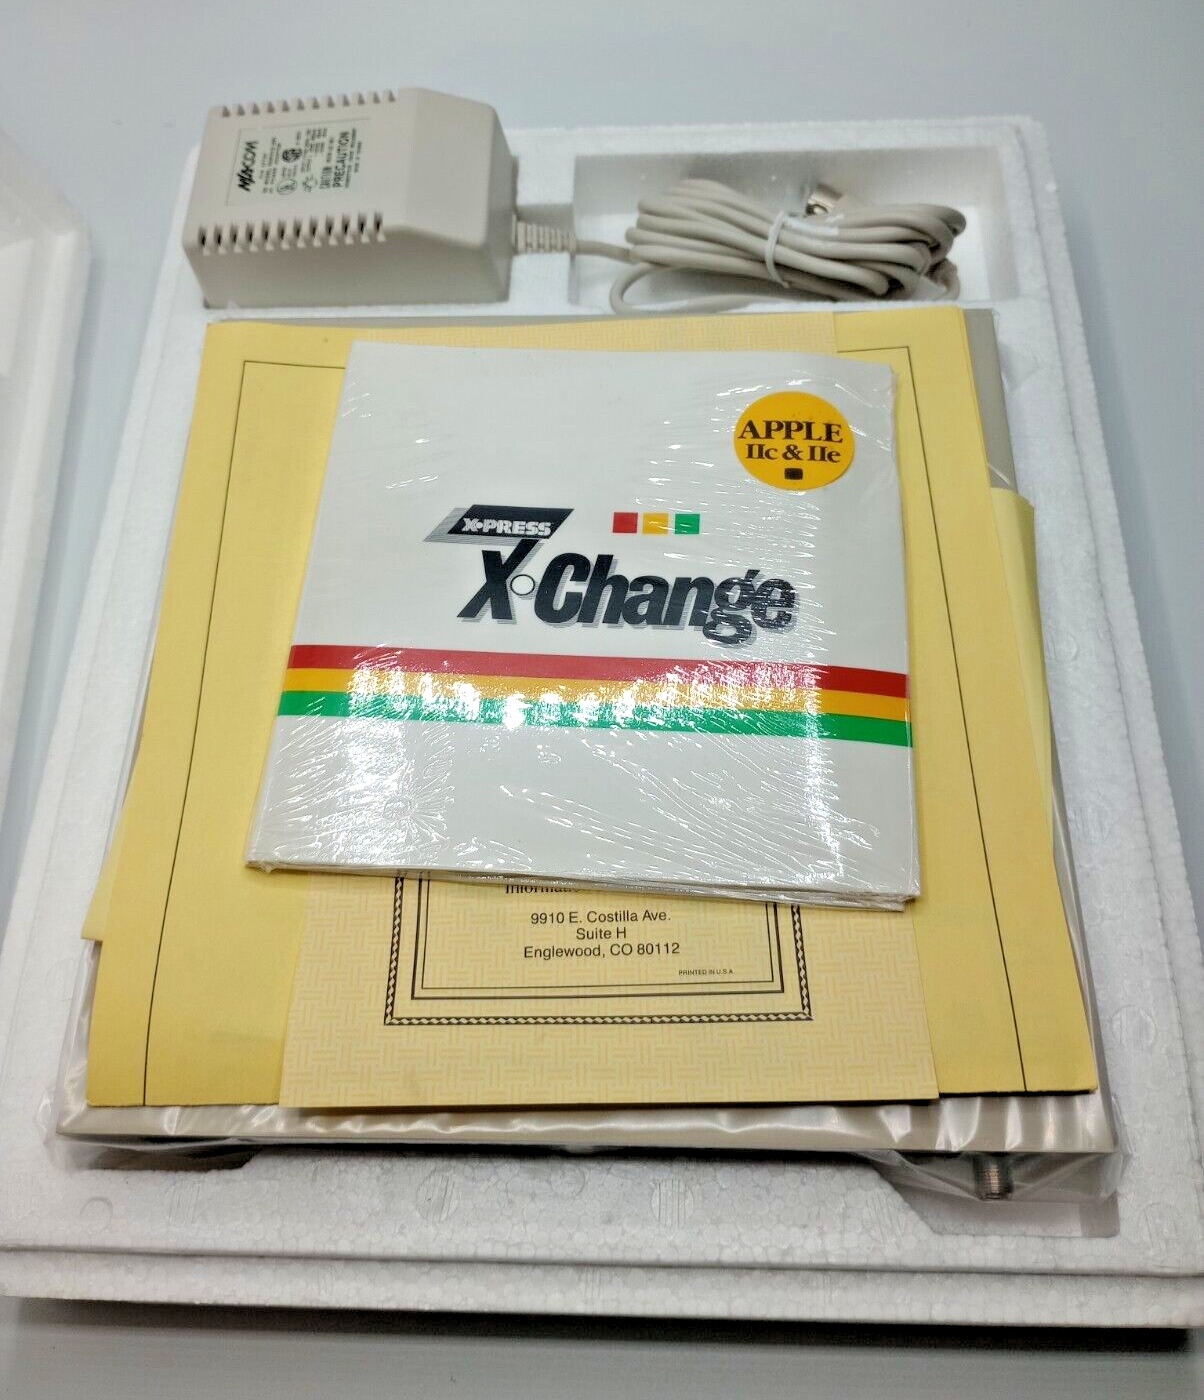 RARE Apple II X*Press X*Change Hardware and Software: OPEN BOX, SEALED DISK